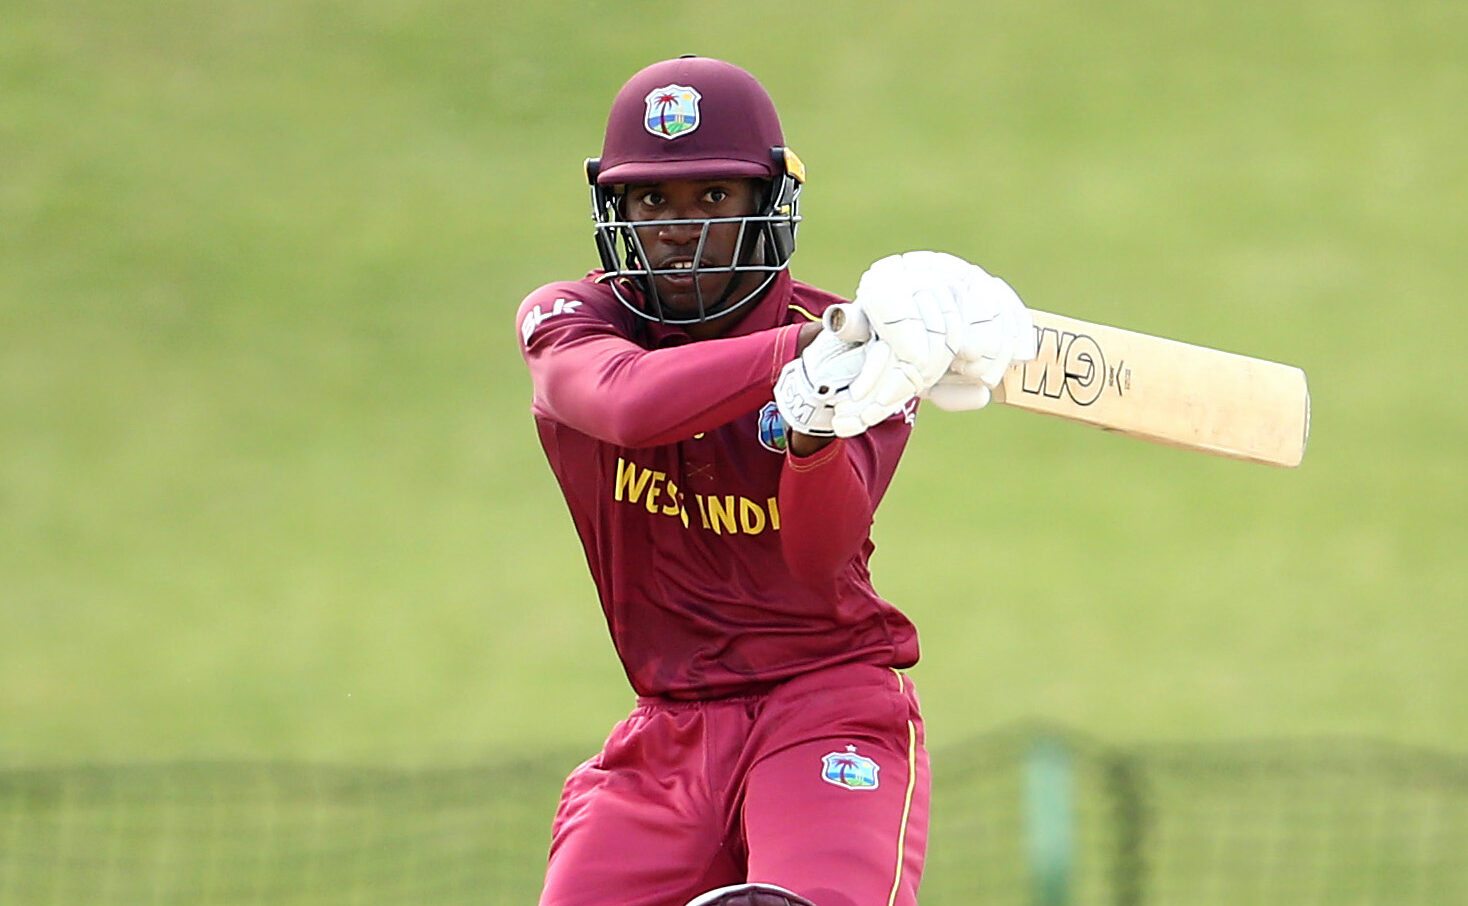 West Indies Academy players assemble for High Performance camp ahead of CG United Super50 Cup